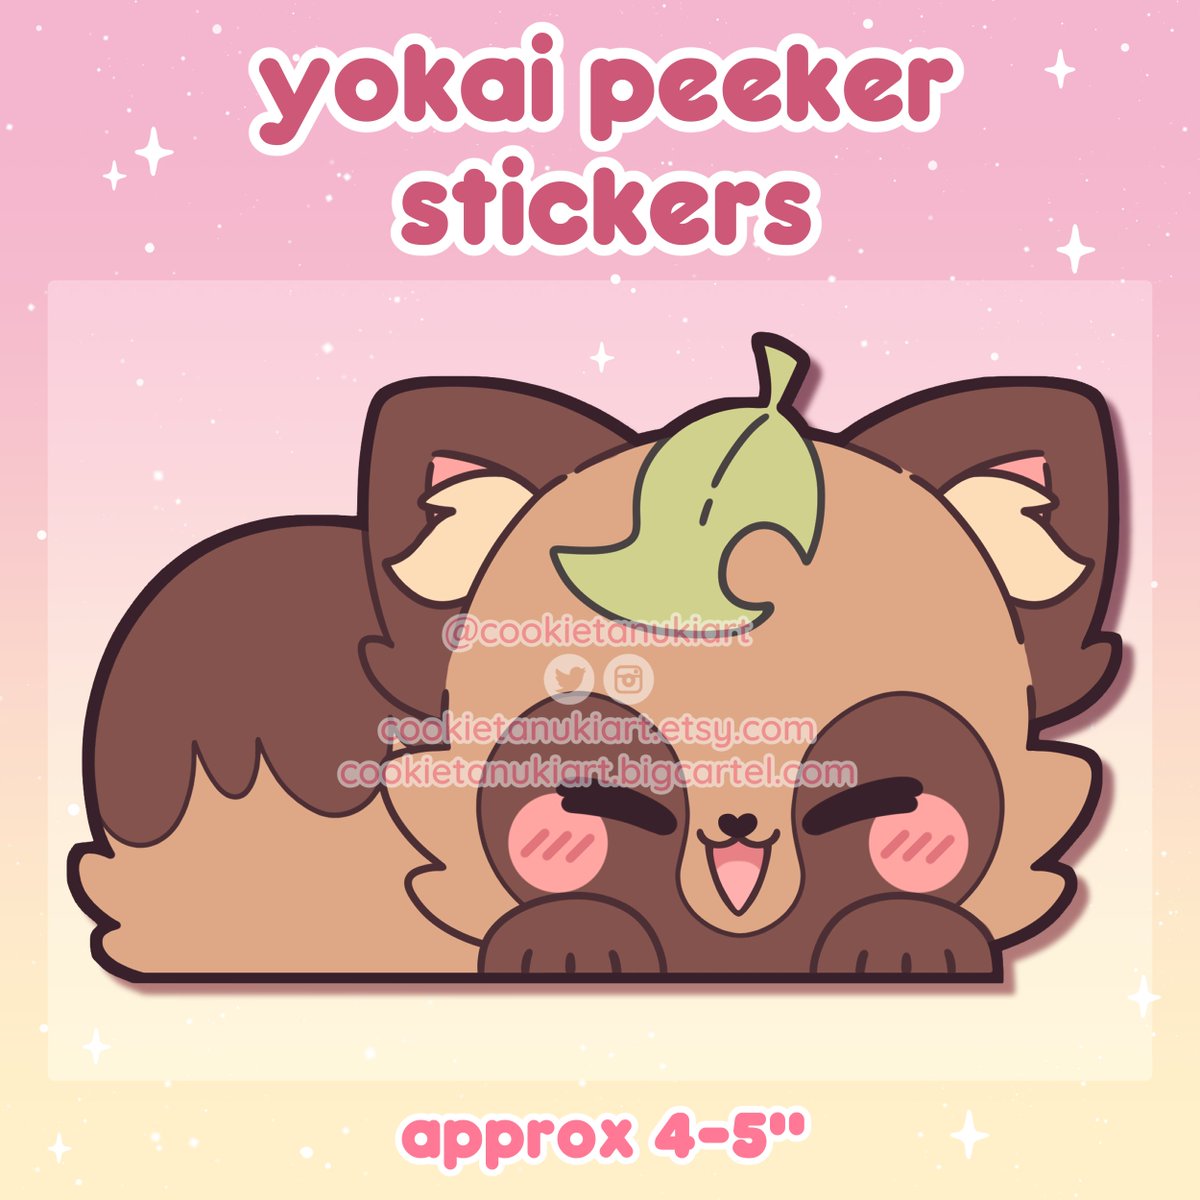 beginning my new line of yokai peeker stickers!! ⛩️✨
I'll be debuting these guys at saboten next weekend and there should be enough stock left for them to pop up in my sh0p!
which yokai would you like to see next? 🦊 